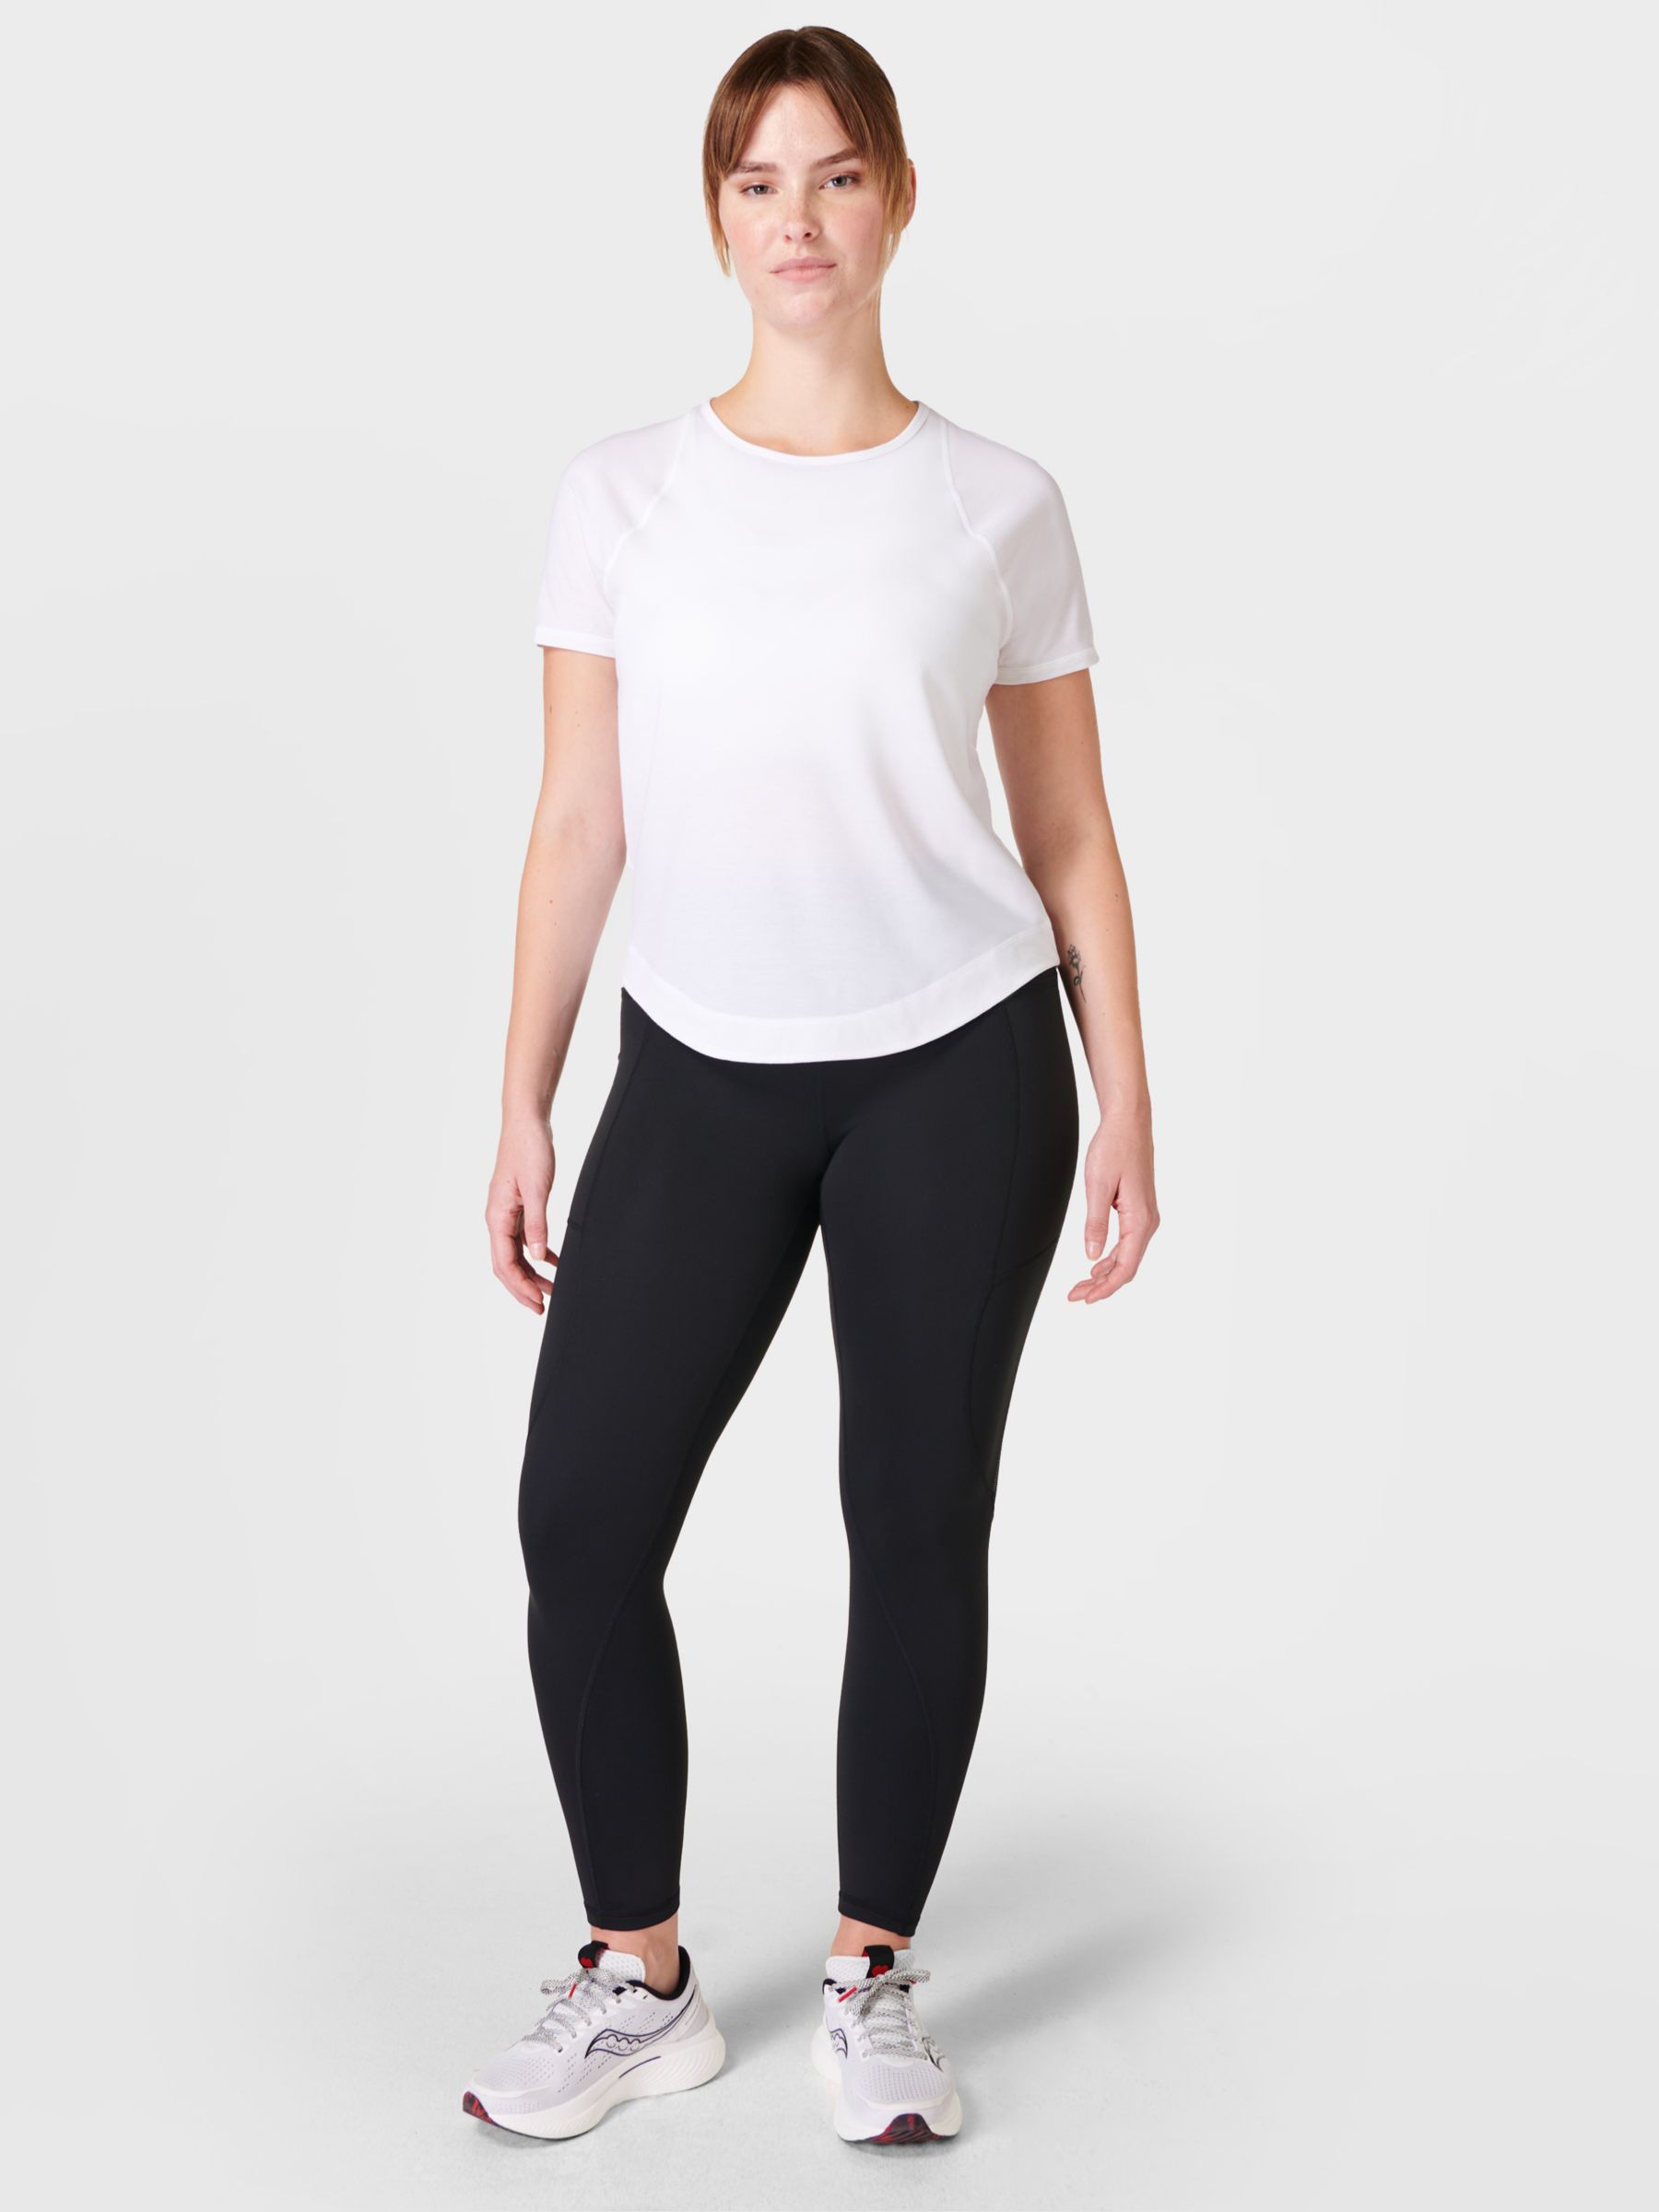 Therma Boost 2.0 7/8 Reflective Running Leggings